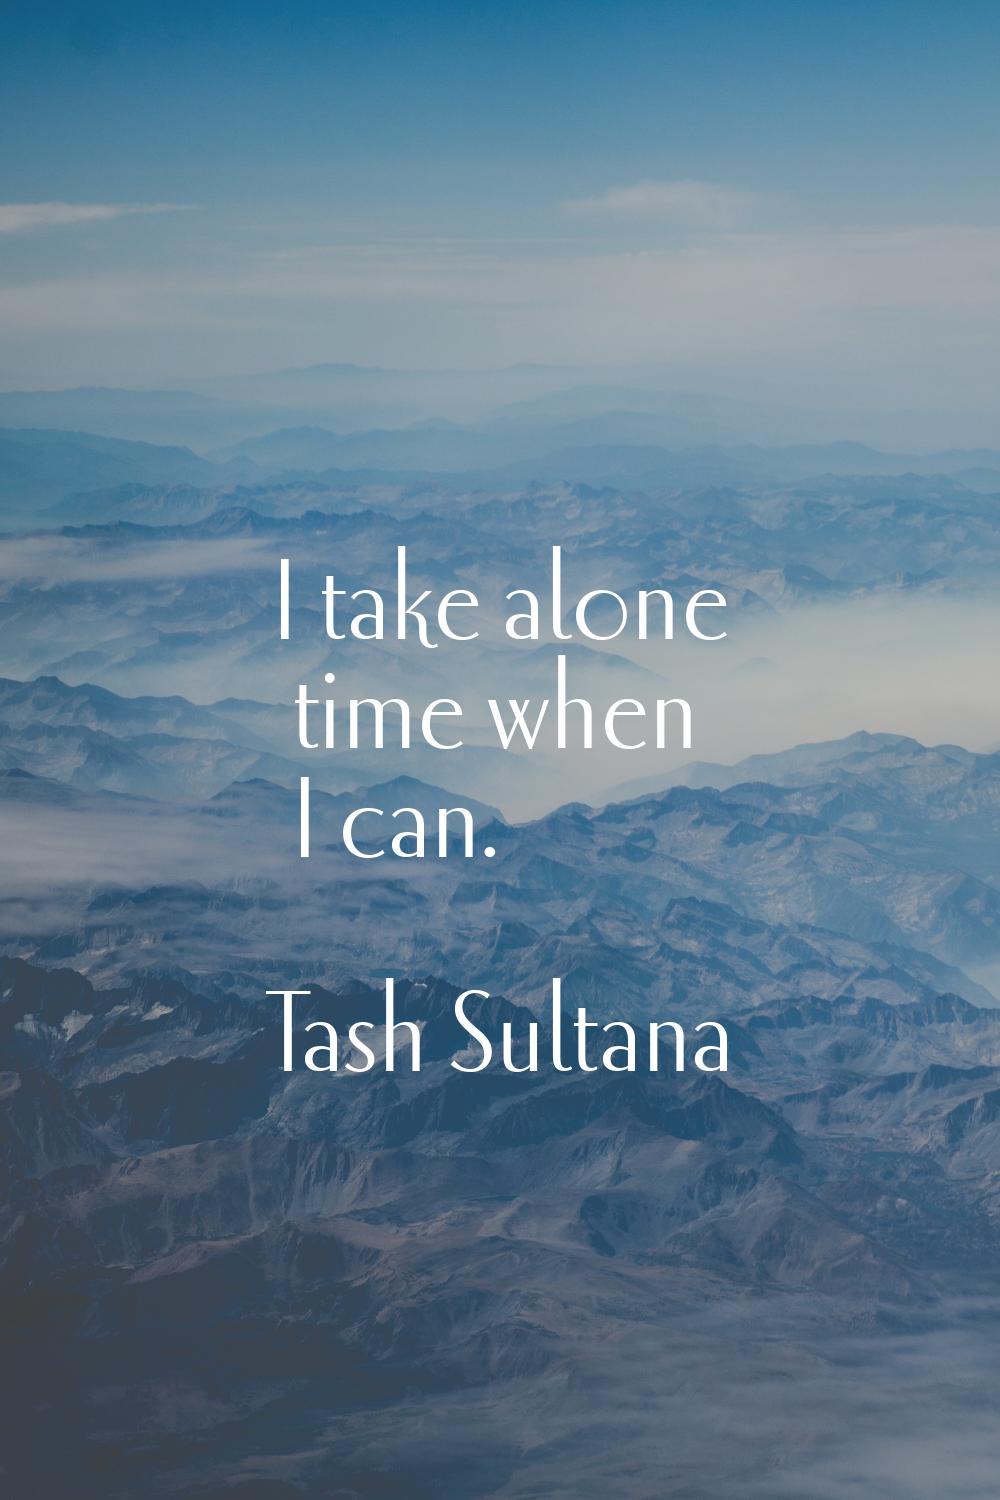 I take alone time when I can.